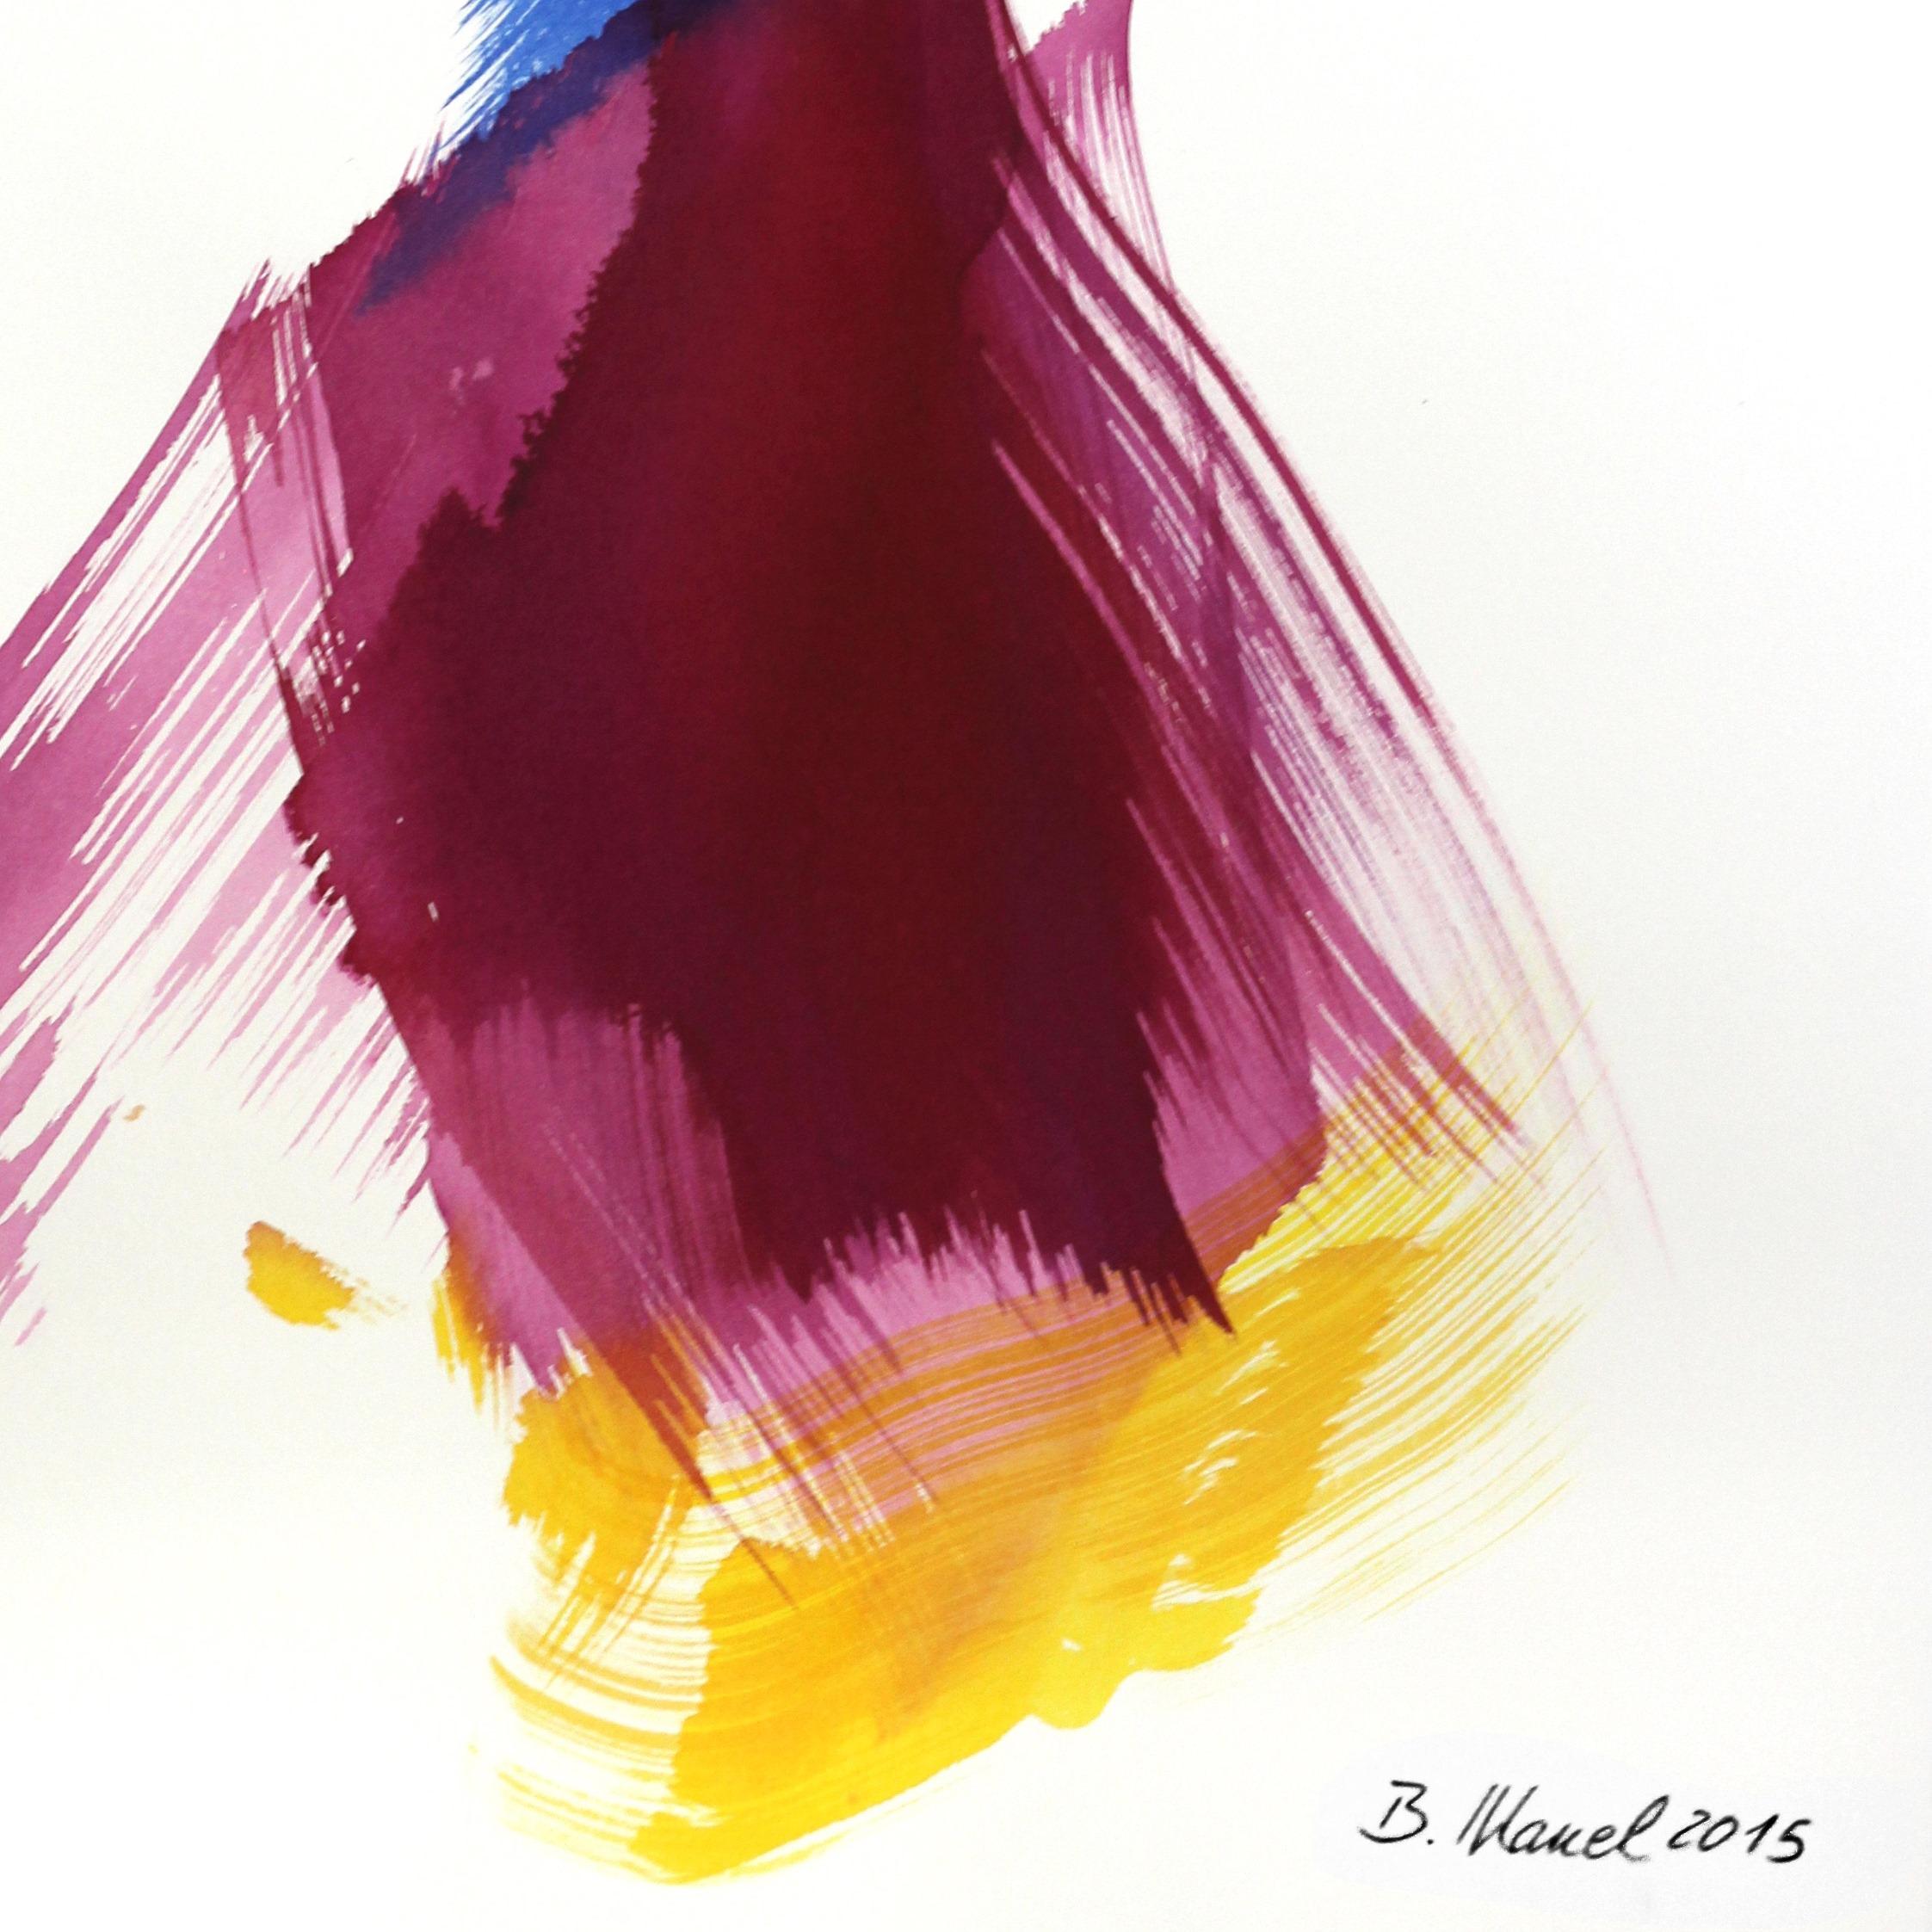 The Violet Dress 9 - Abstract Expressionist Painting by Bettina Mauel